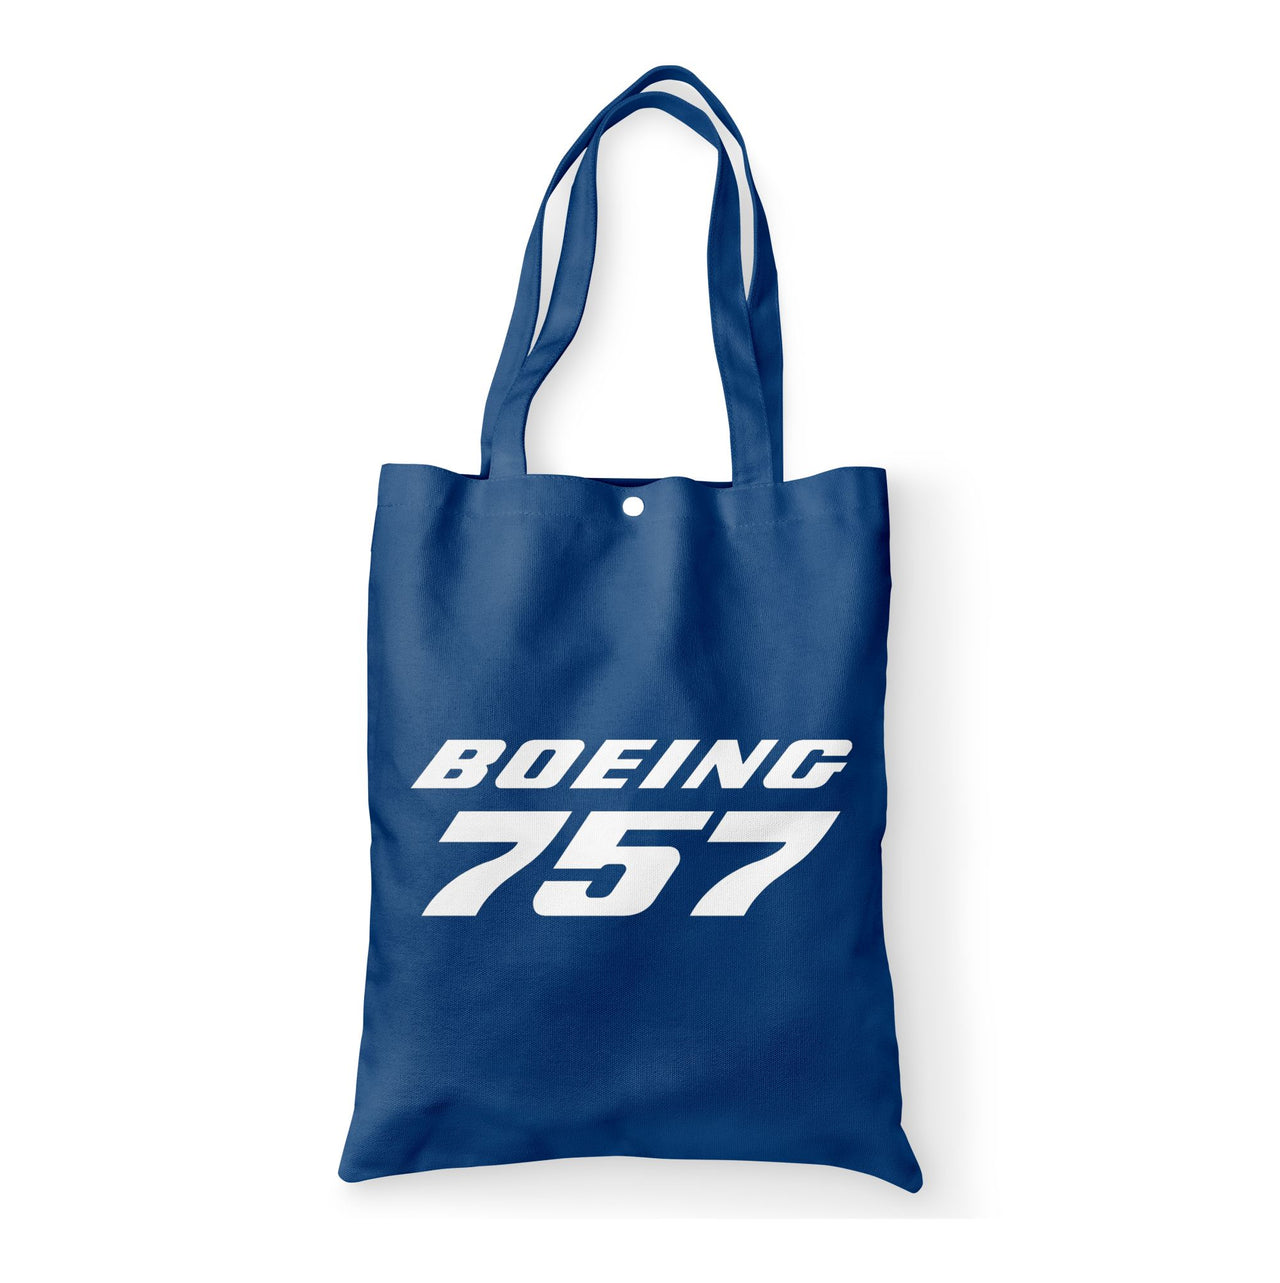 Boeing 757 & Text Designed Tote Bags